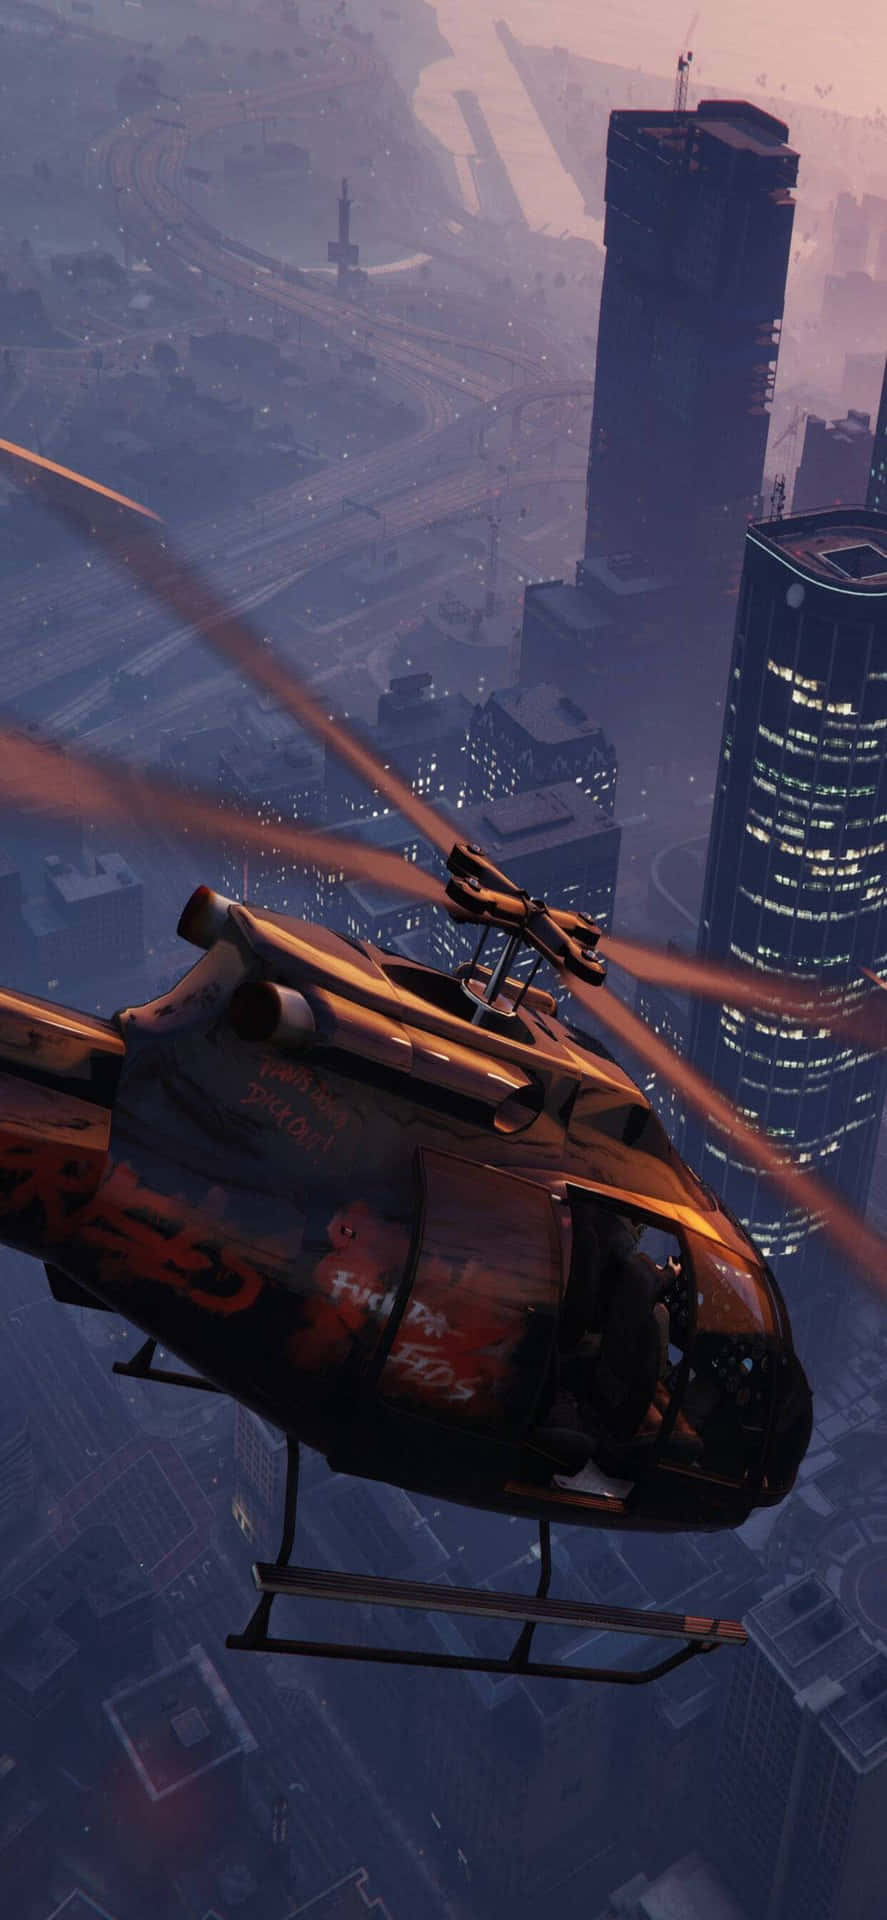 Iphone Xs Max Grand Theft Auto V Background Helicopter Flying Around